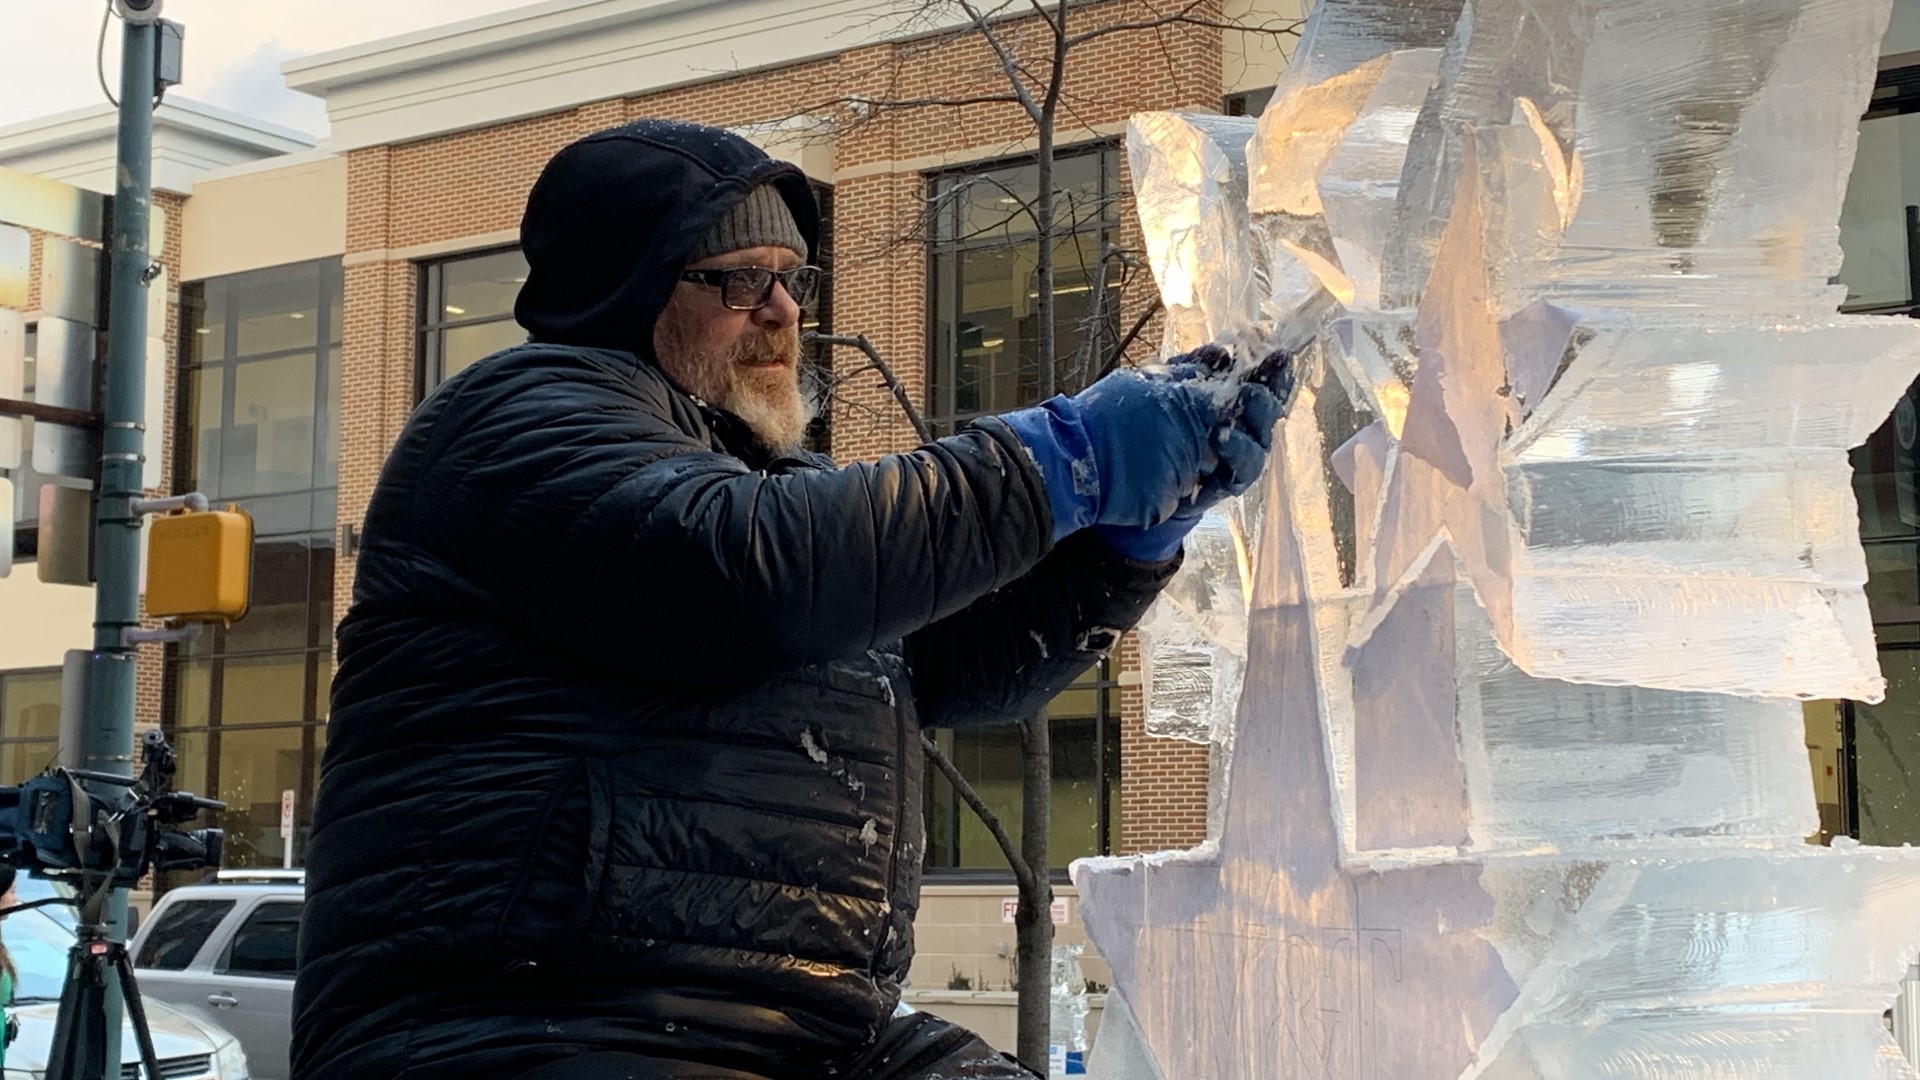 Over 47 tons of ice were on display in Downtown Chambersburg, including 16 large sculptures, 102 small sculptures, and a 40-foot-long ice slide.